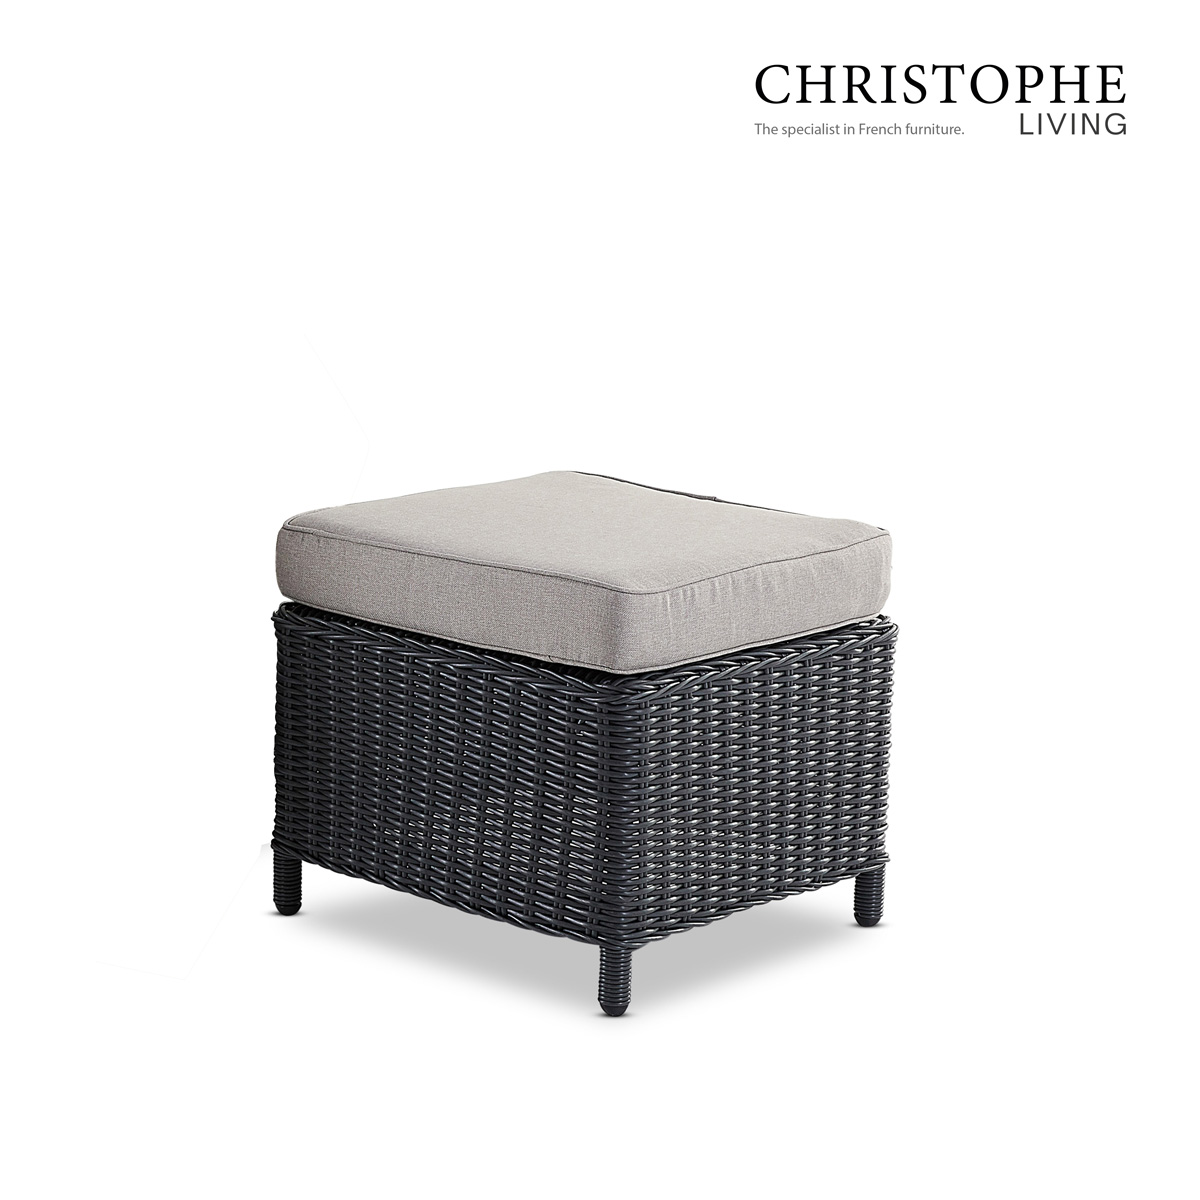 Whitehaven Refined Wicker Footstool in Anthracite with Water-Resistant Fabric